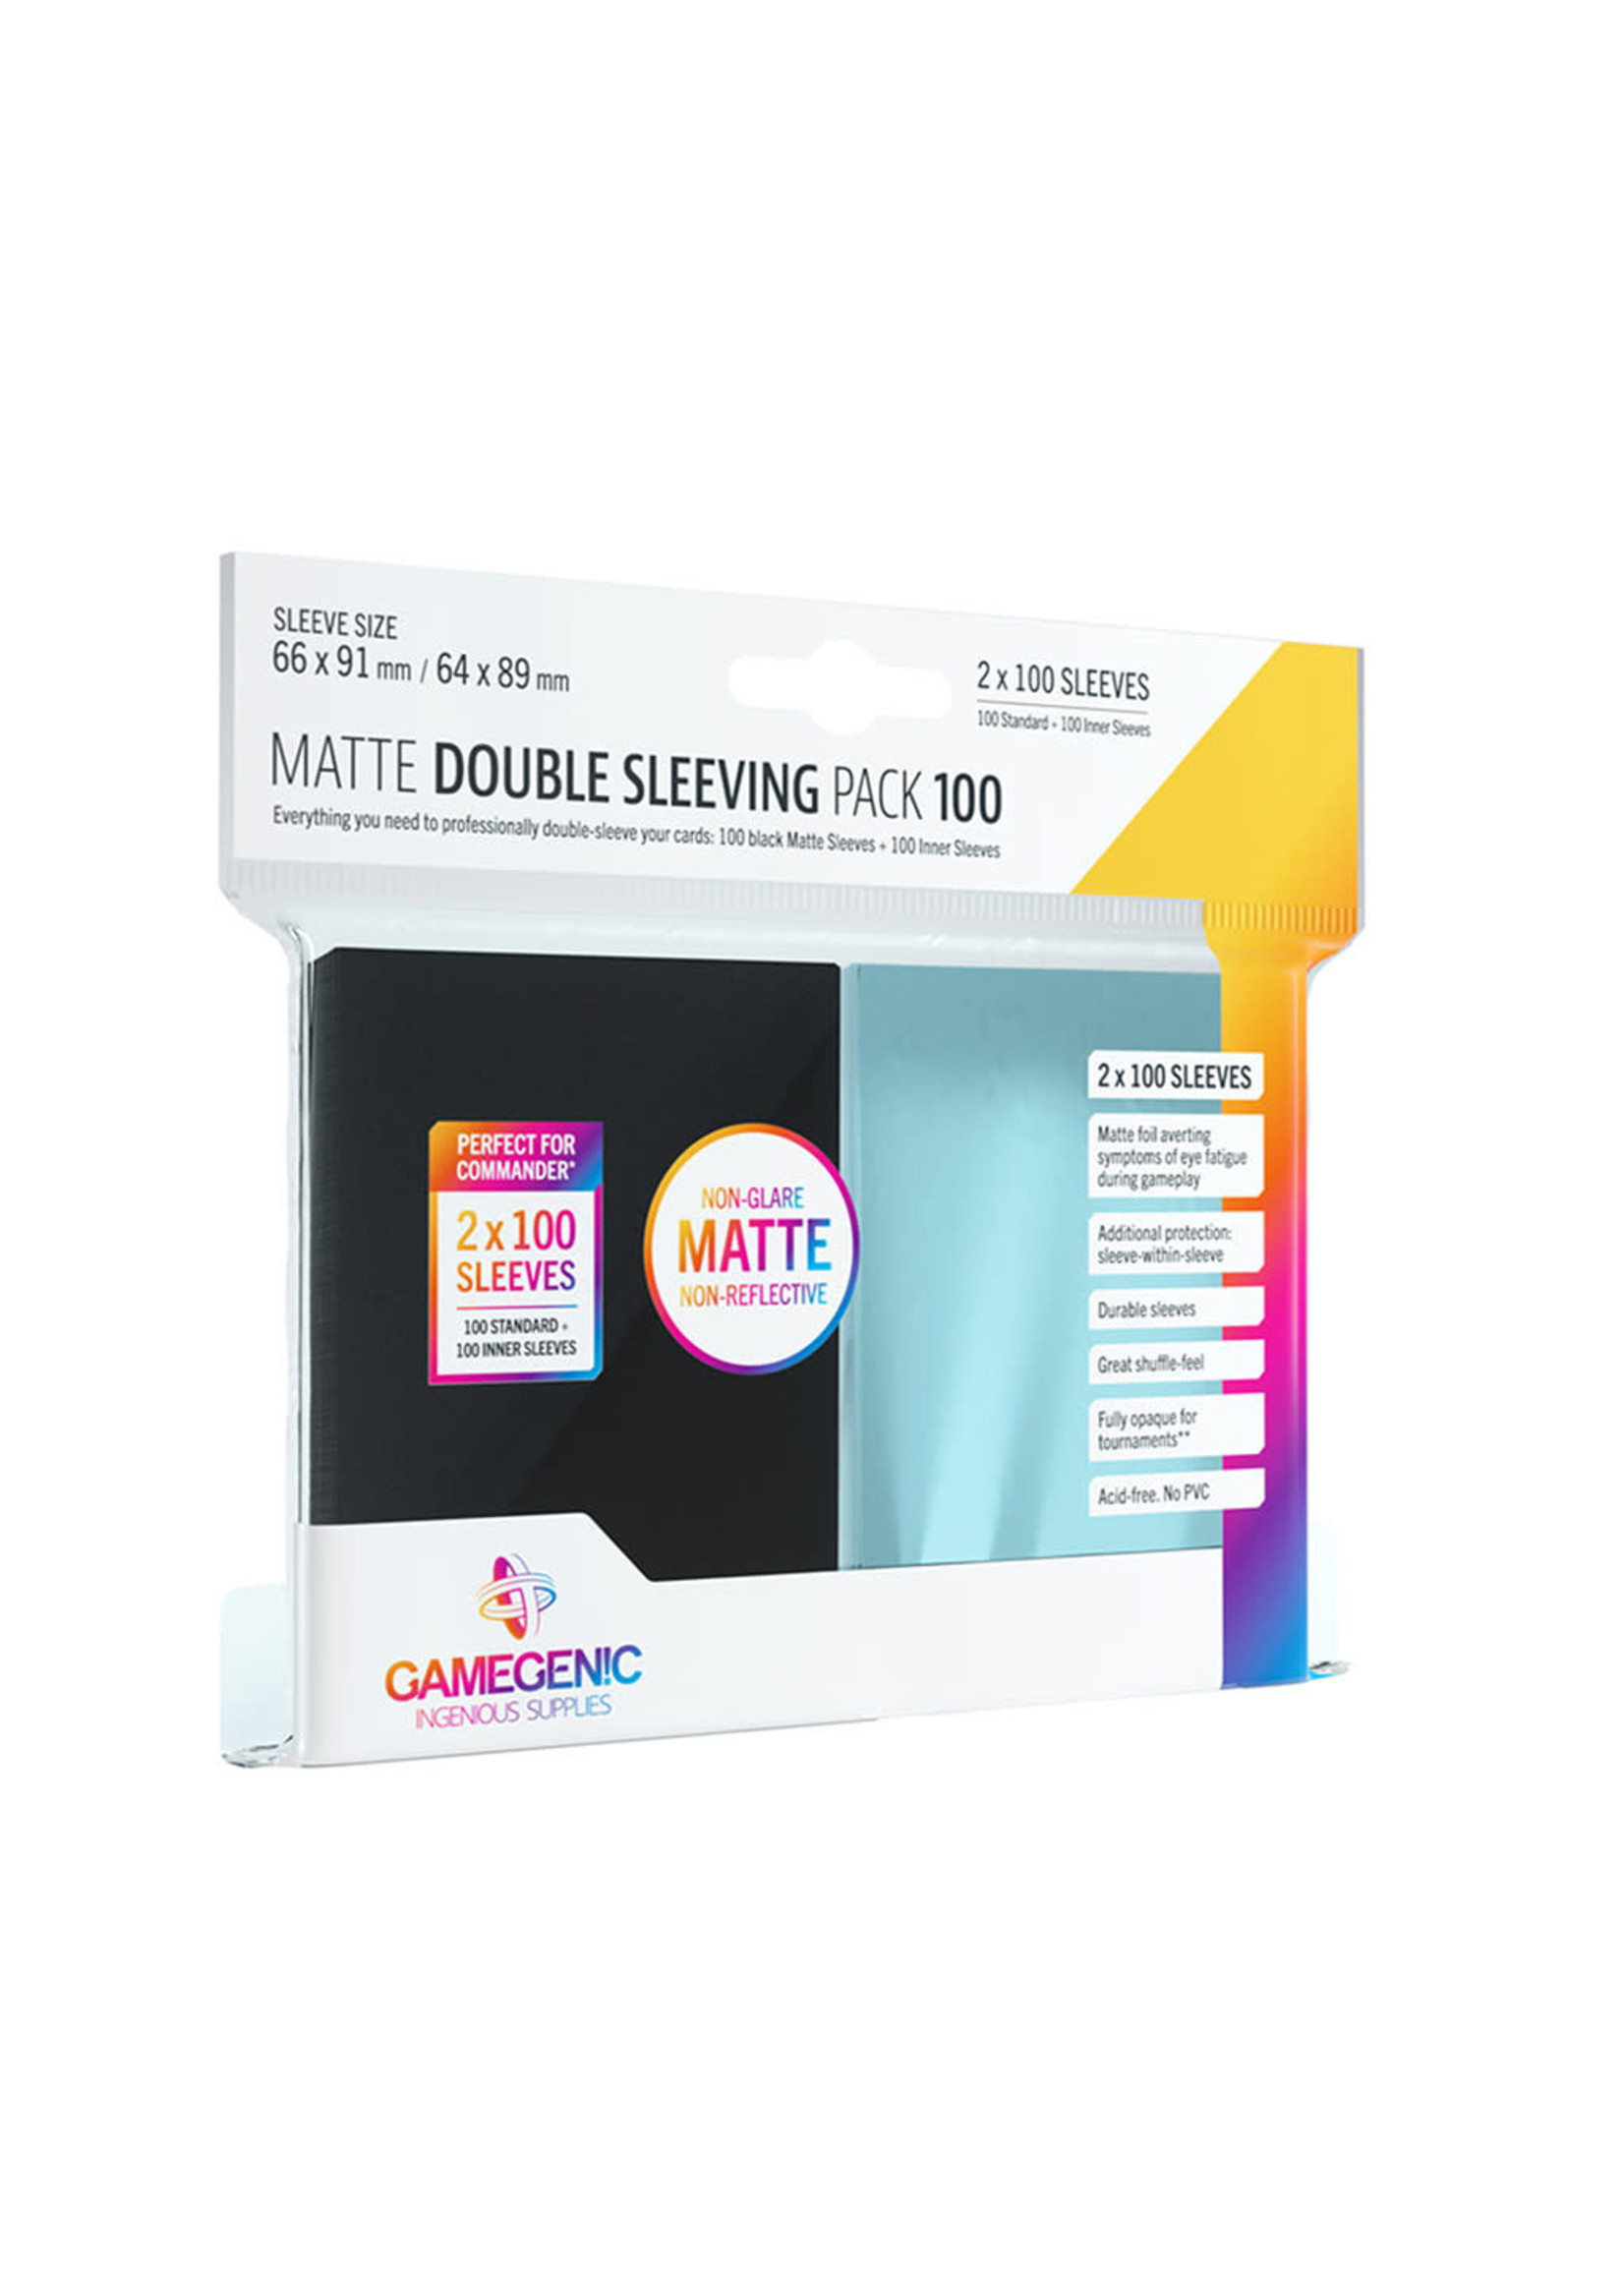 Gamegenic Sleeves: MATTE Double Sleeving Pack (100)